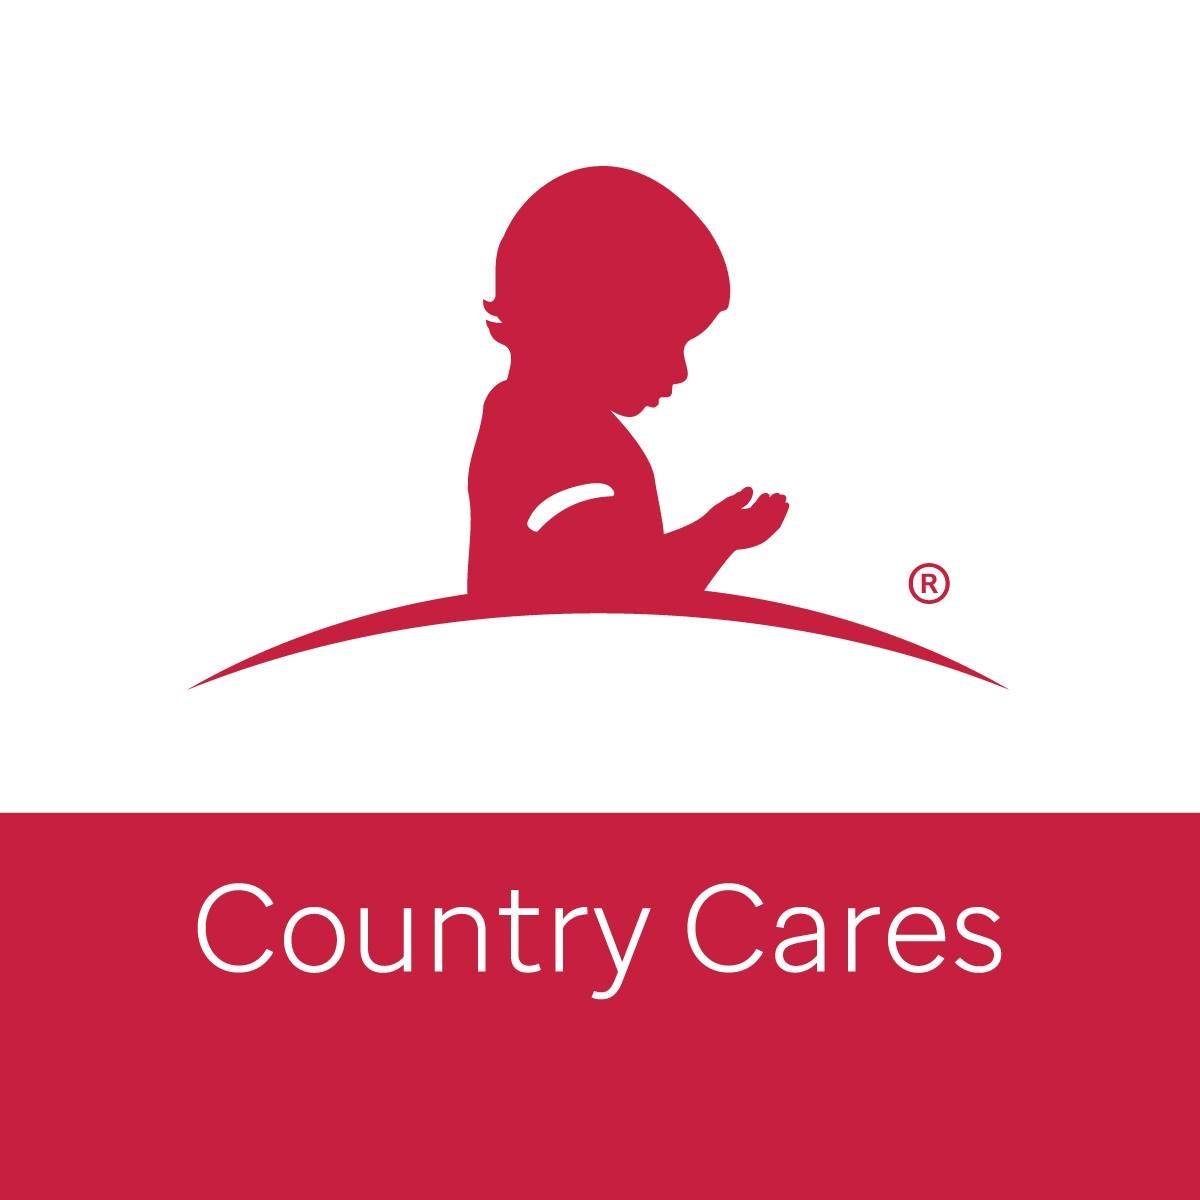 St. Jude Country Cares Radiothon